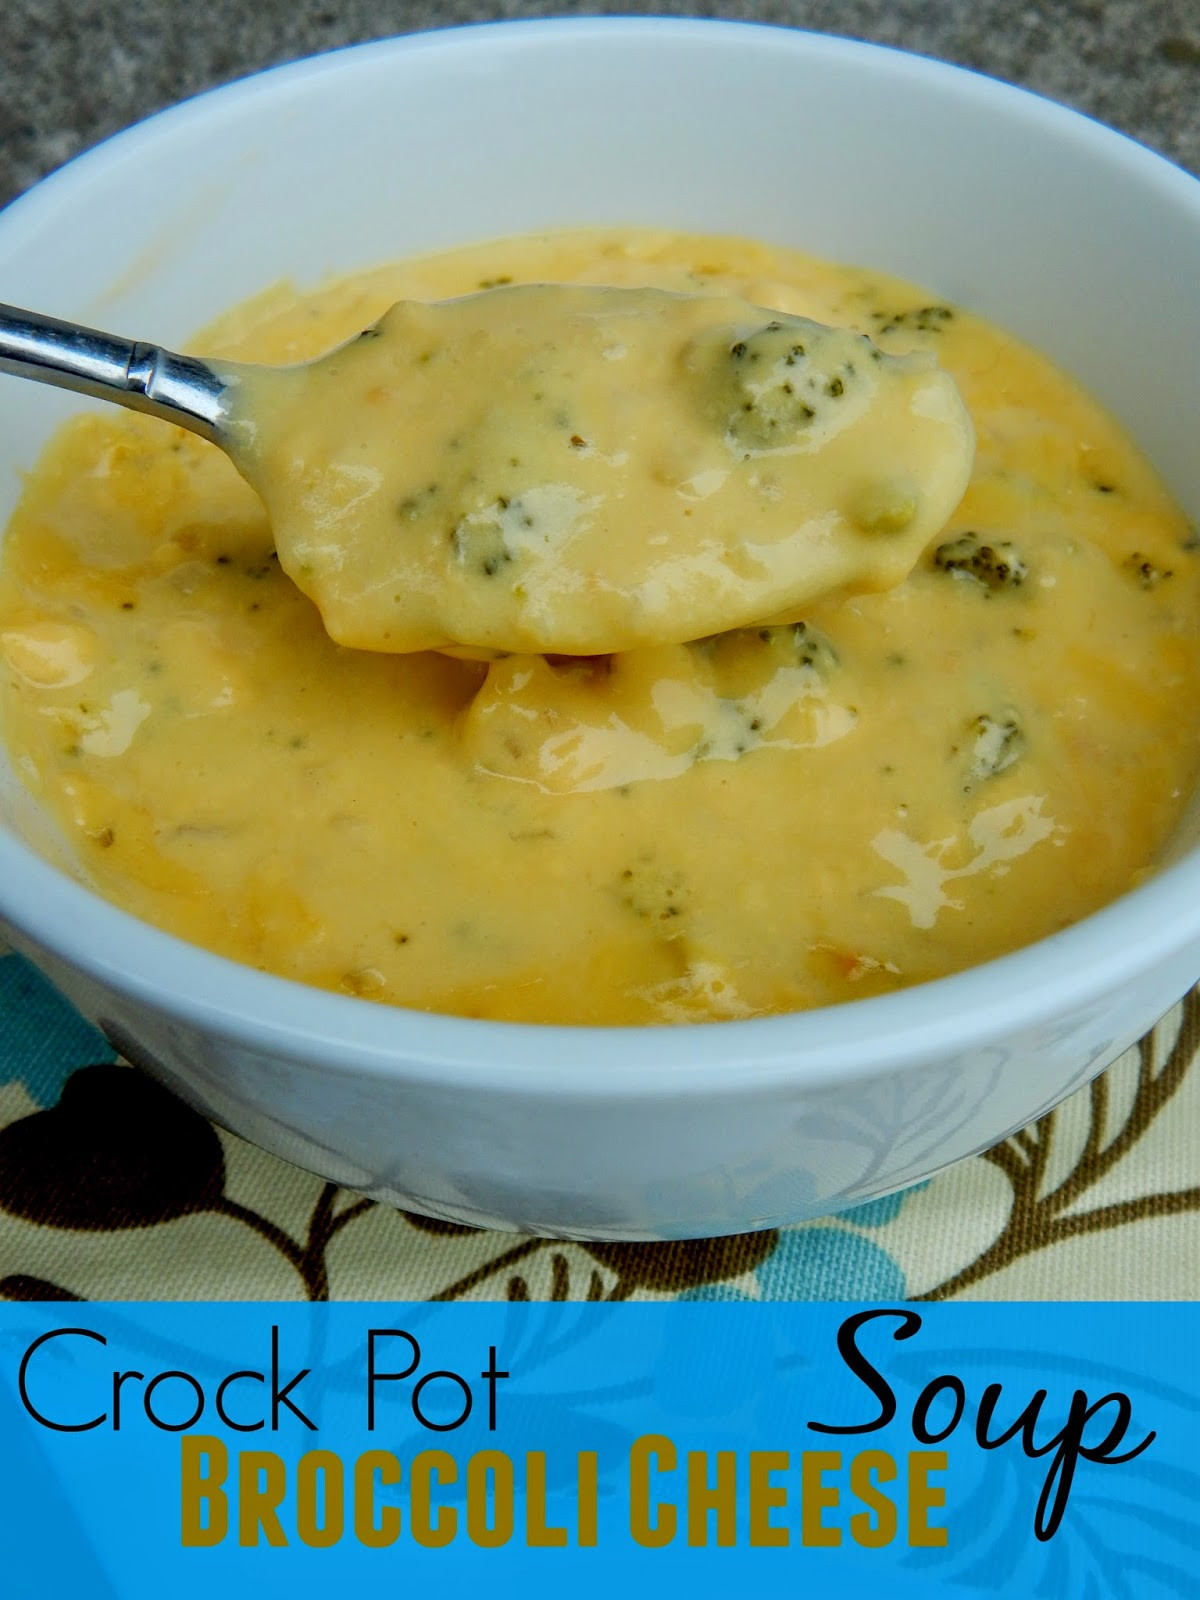 Crockpot Broccoli Cheese Soup
 Ally s Sweet and Savory Eats Crock Pot Broccoli Cheese Soup